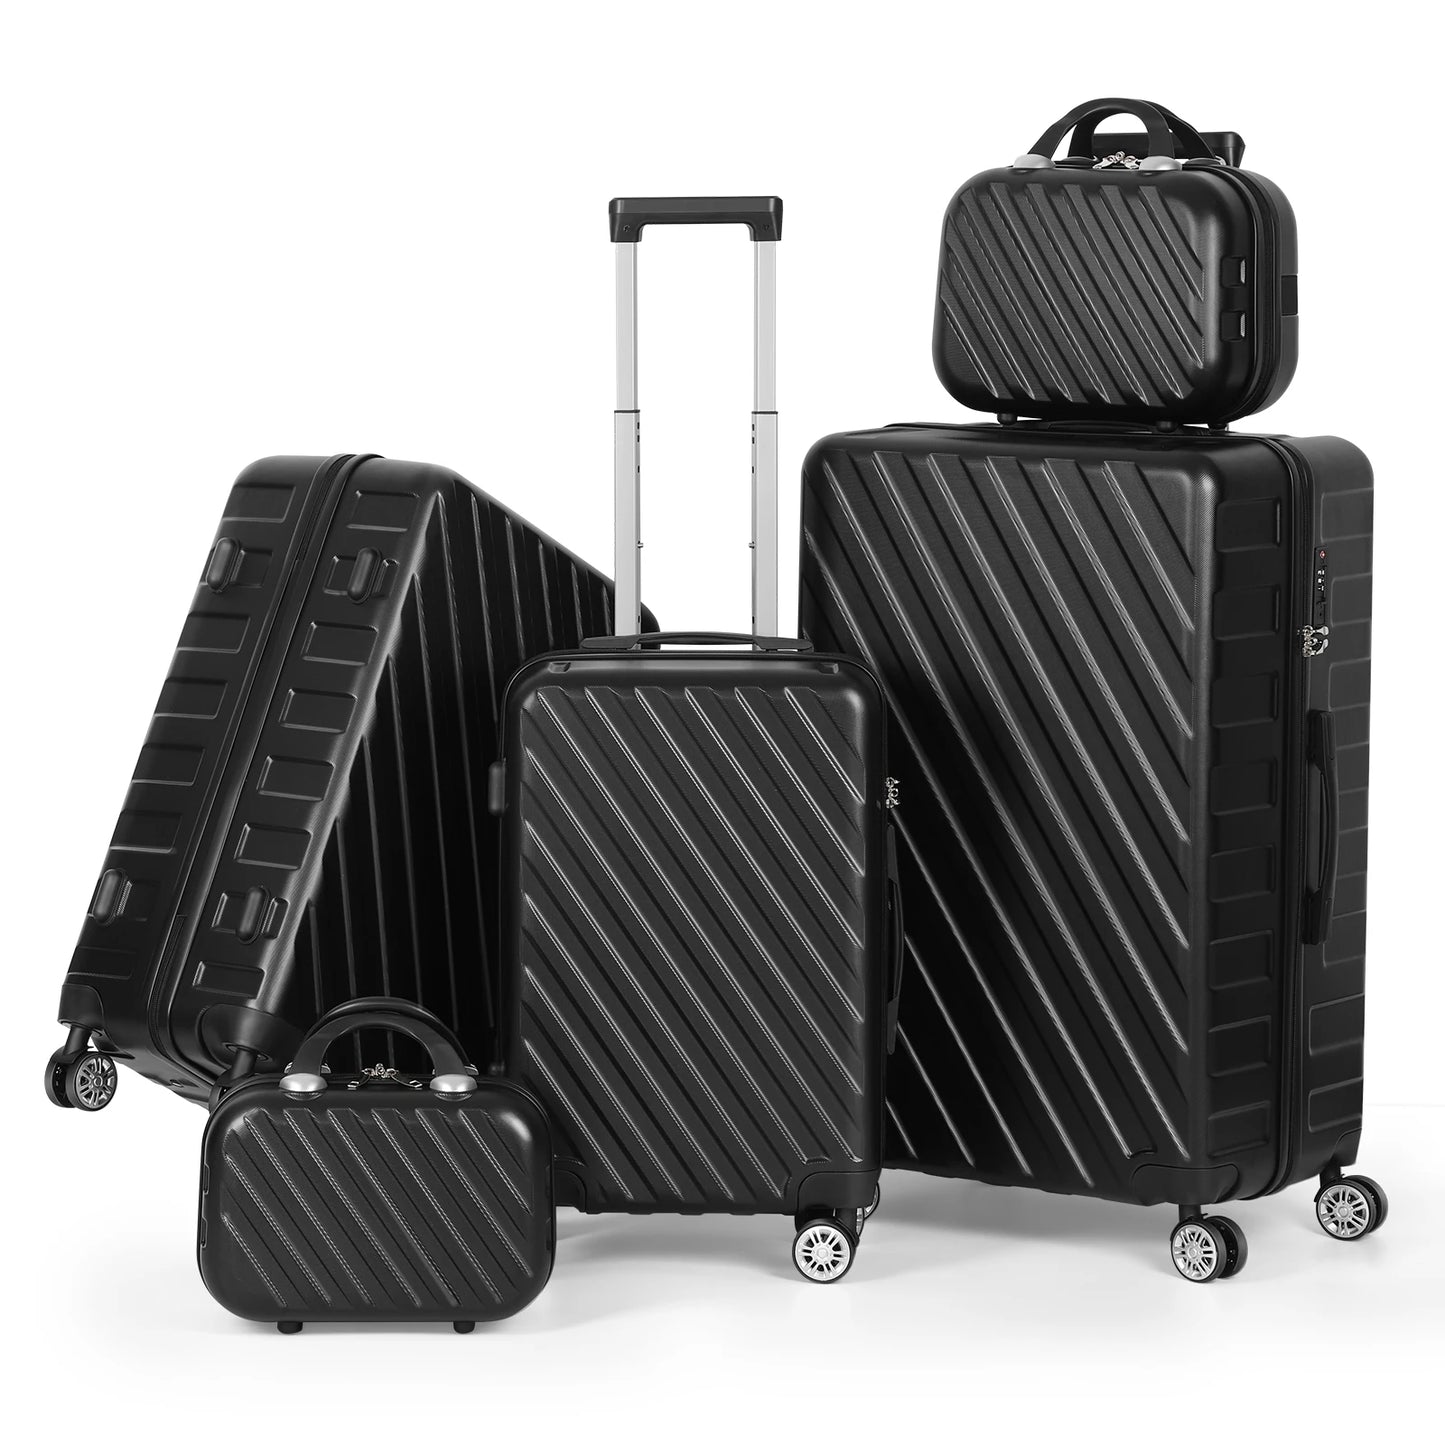 "Premium 5-Piece Black Luggage Set with Silent Spinner Wheels - Perfect for Family Travel!"